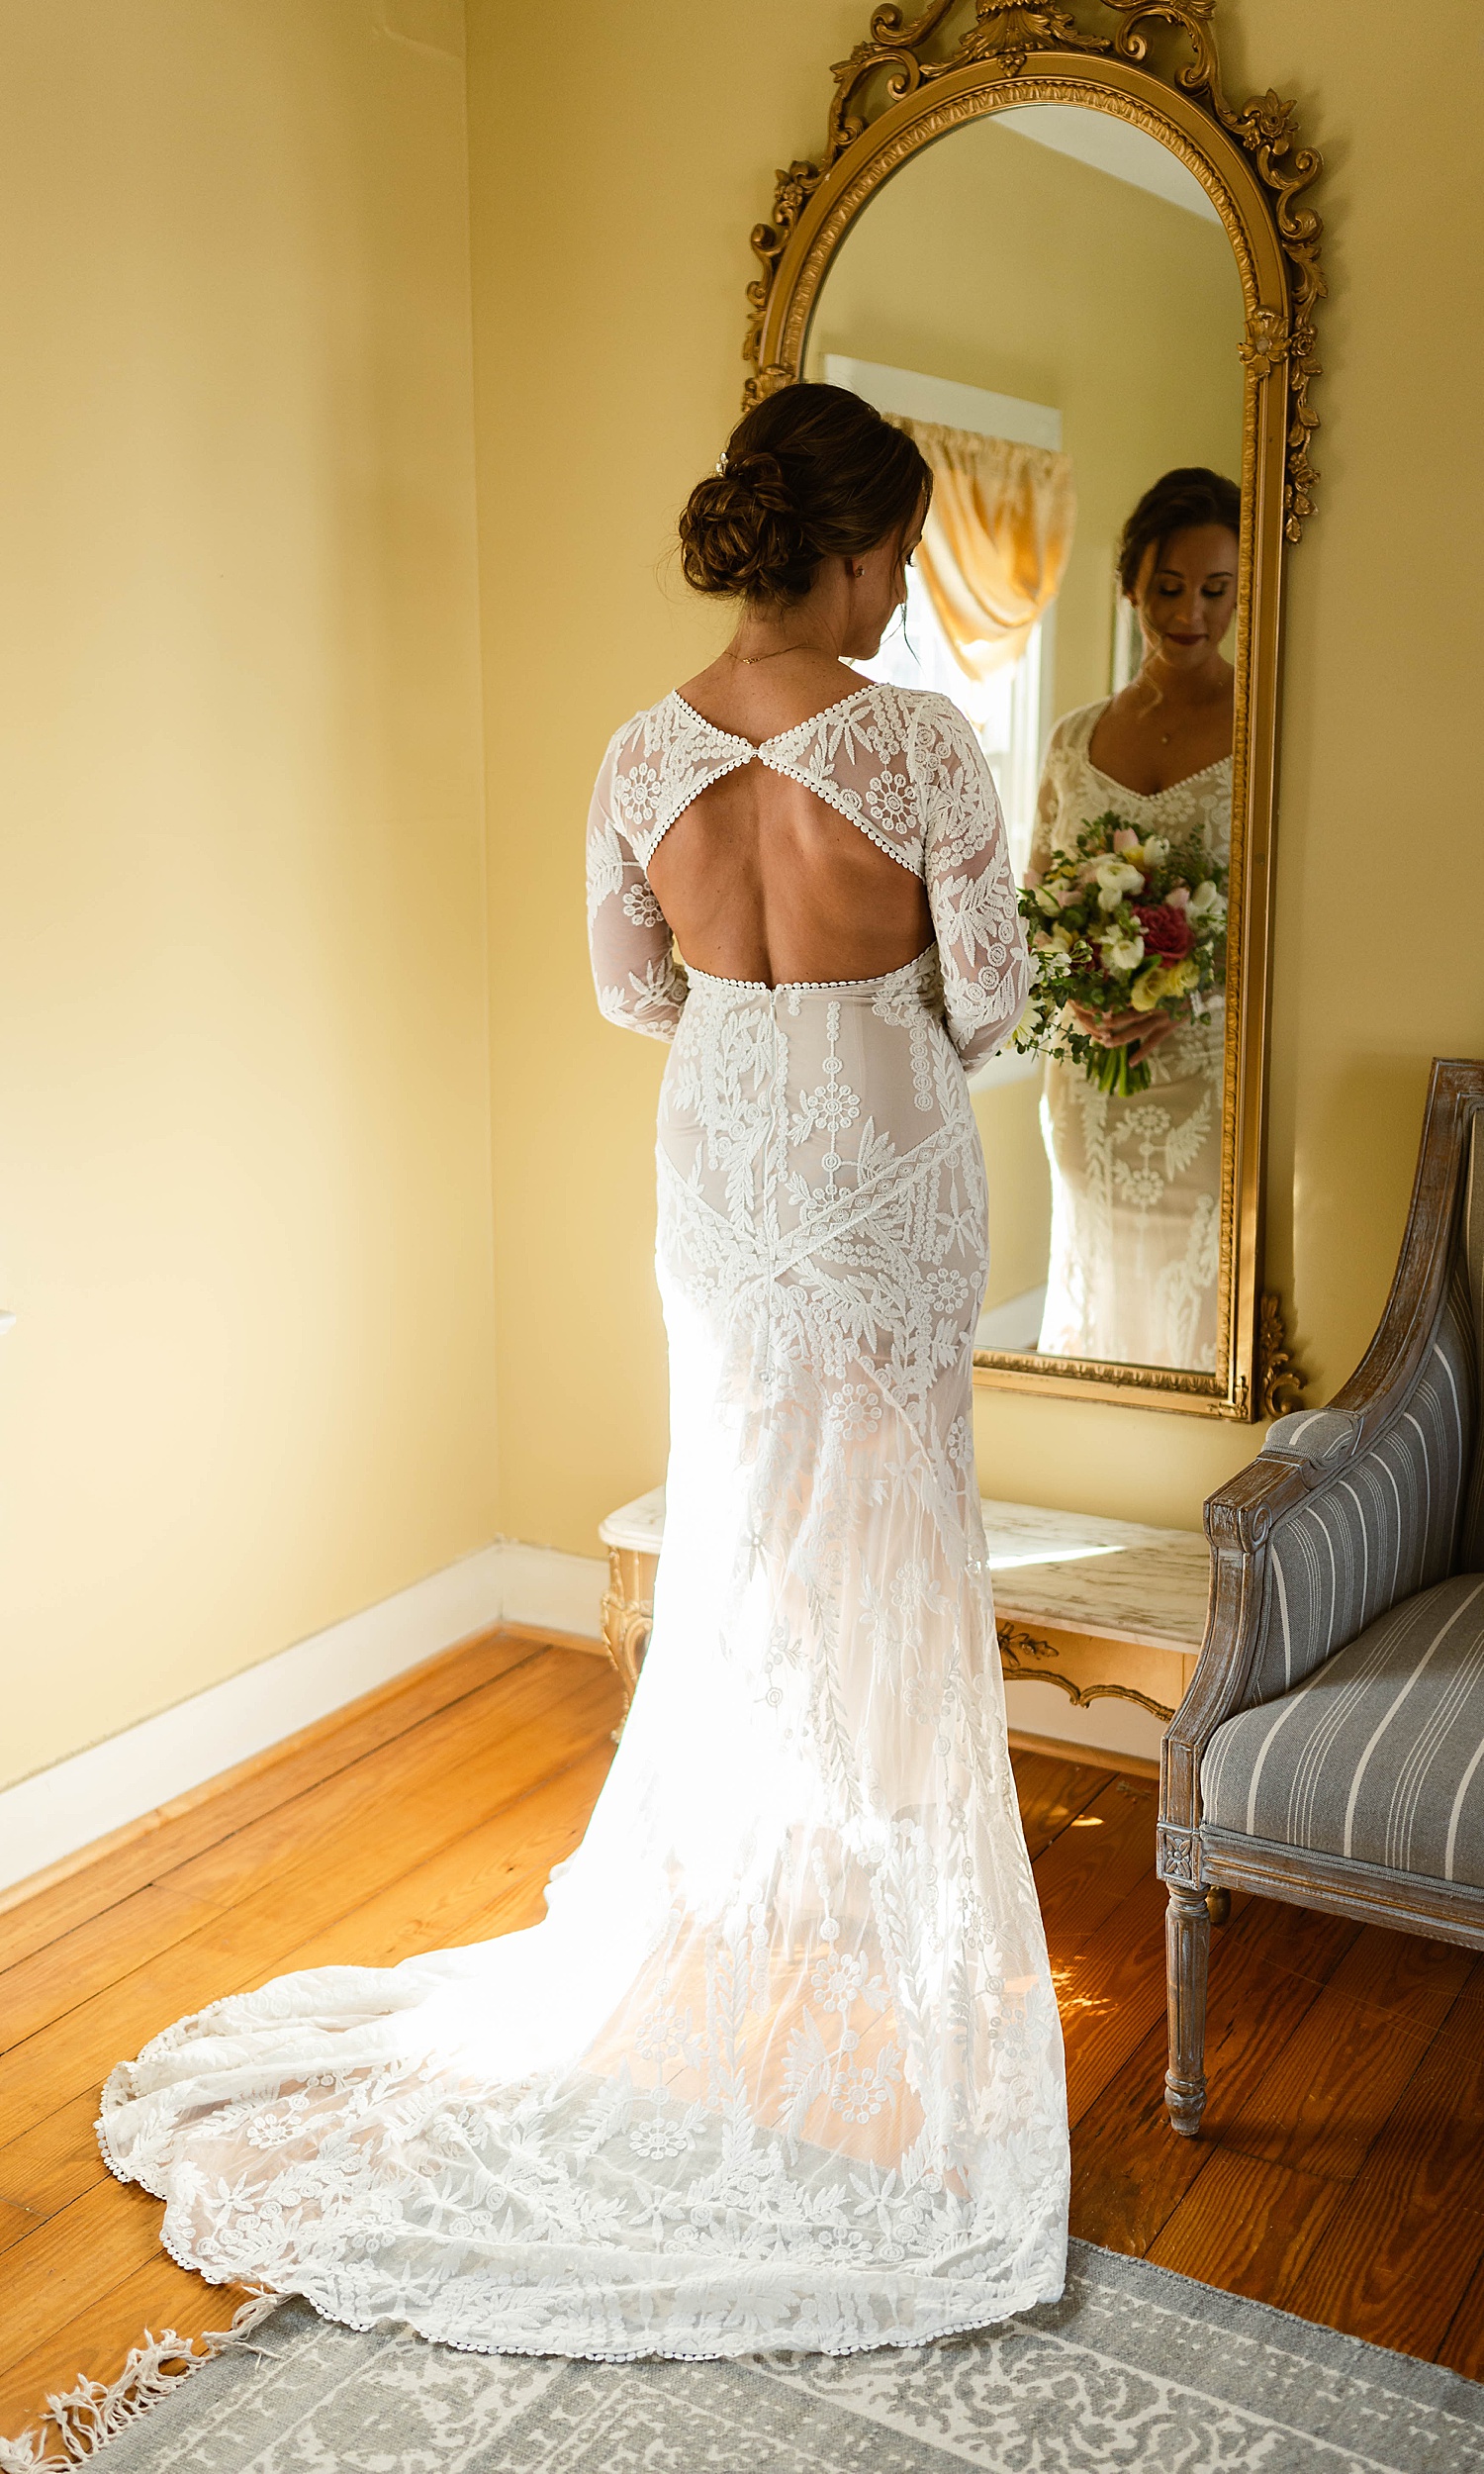 Bride in lace gown standing in front of a mirror by Hannah Louise Photo